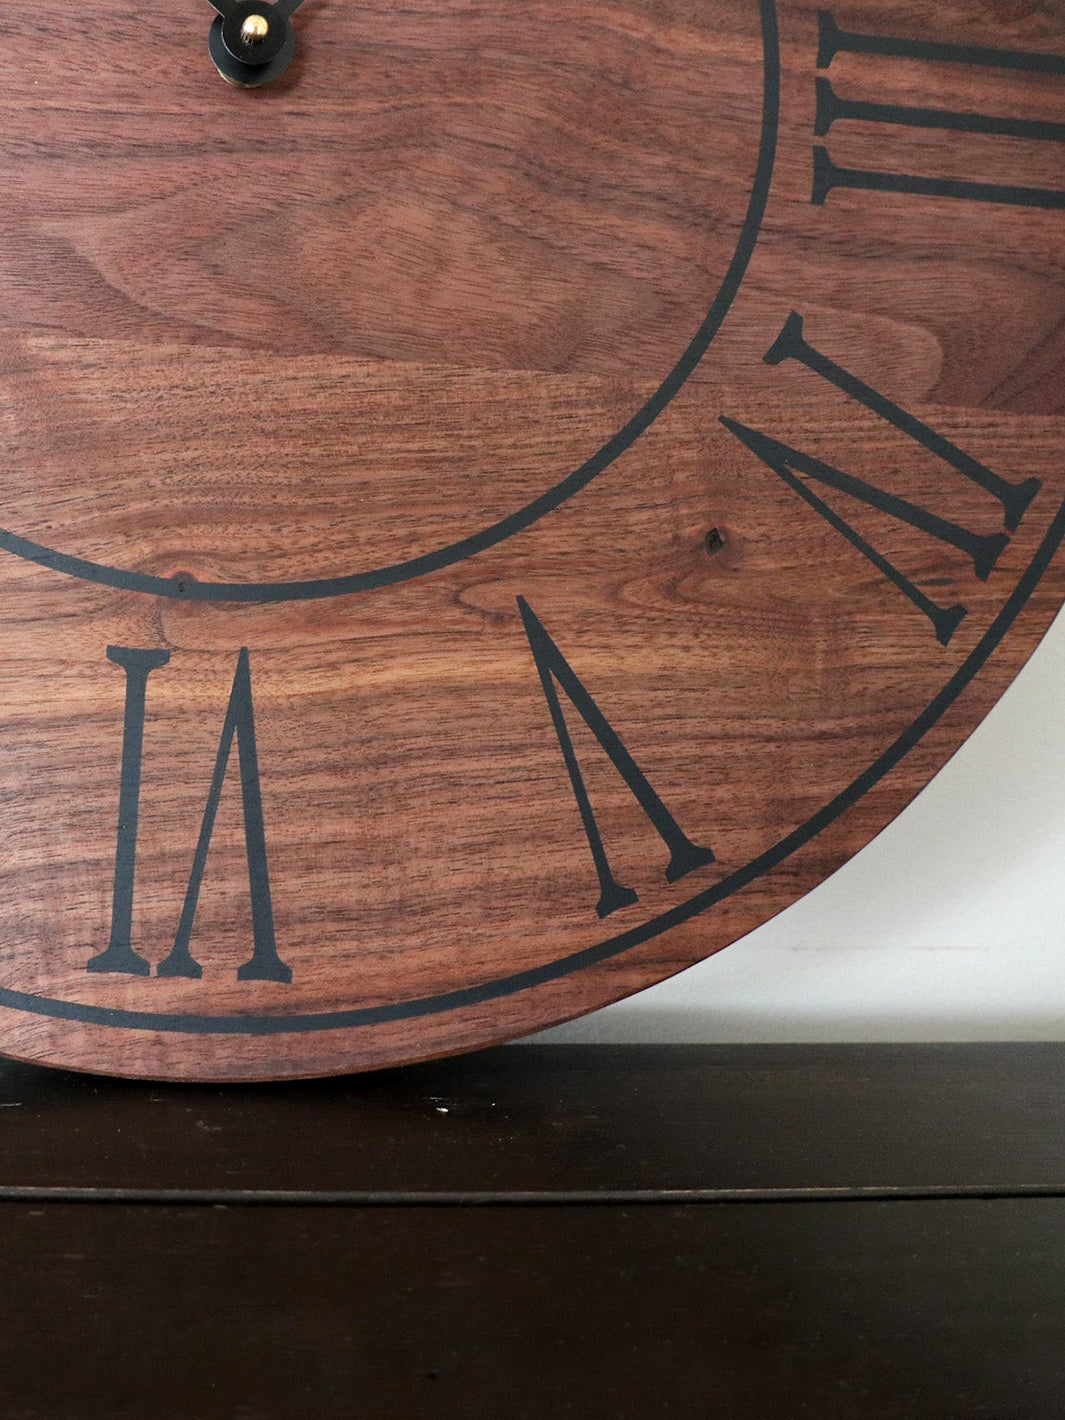 Solid Walnut Wall Clock - Black Lines and Roman Numerals Earthly Comfort Clocks 1384-2